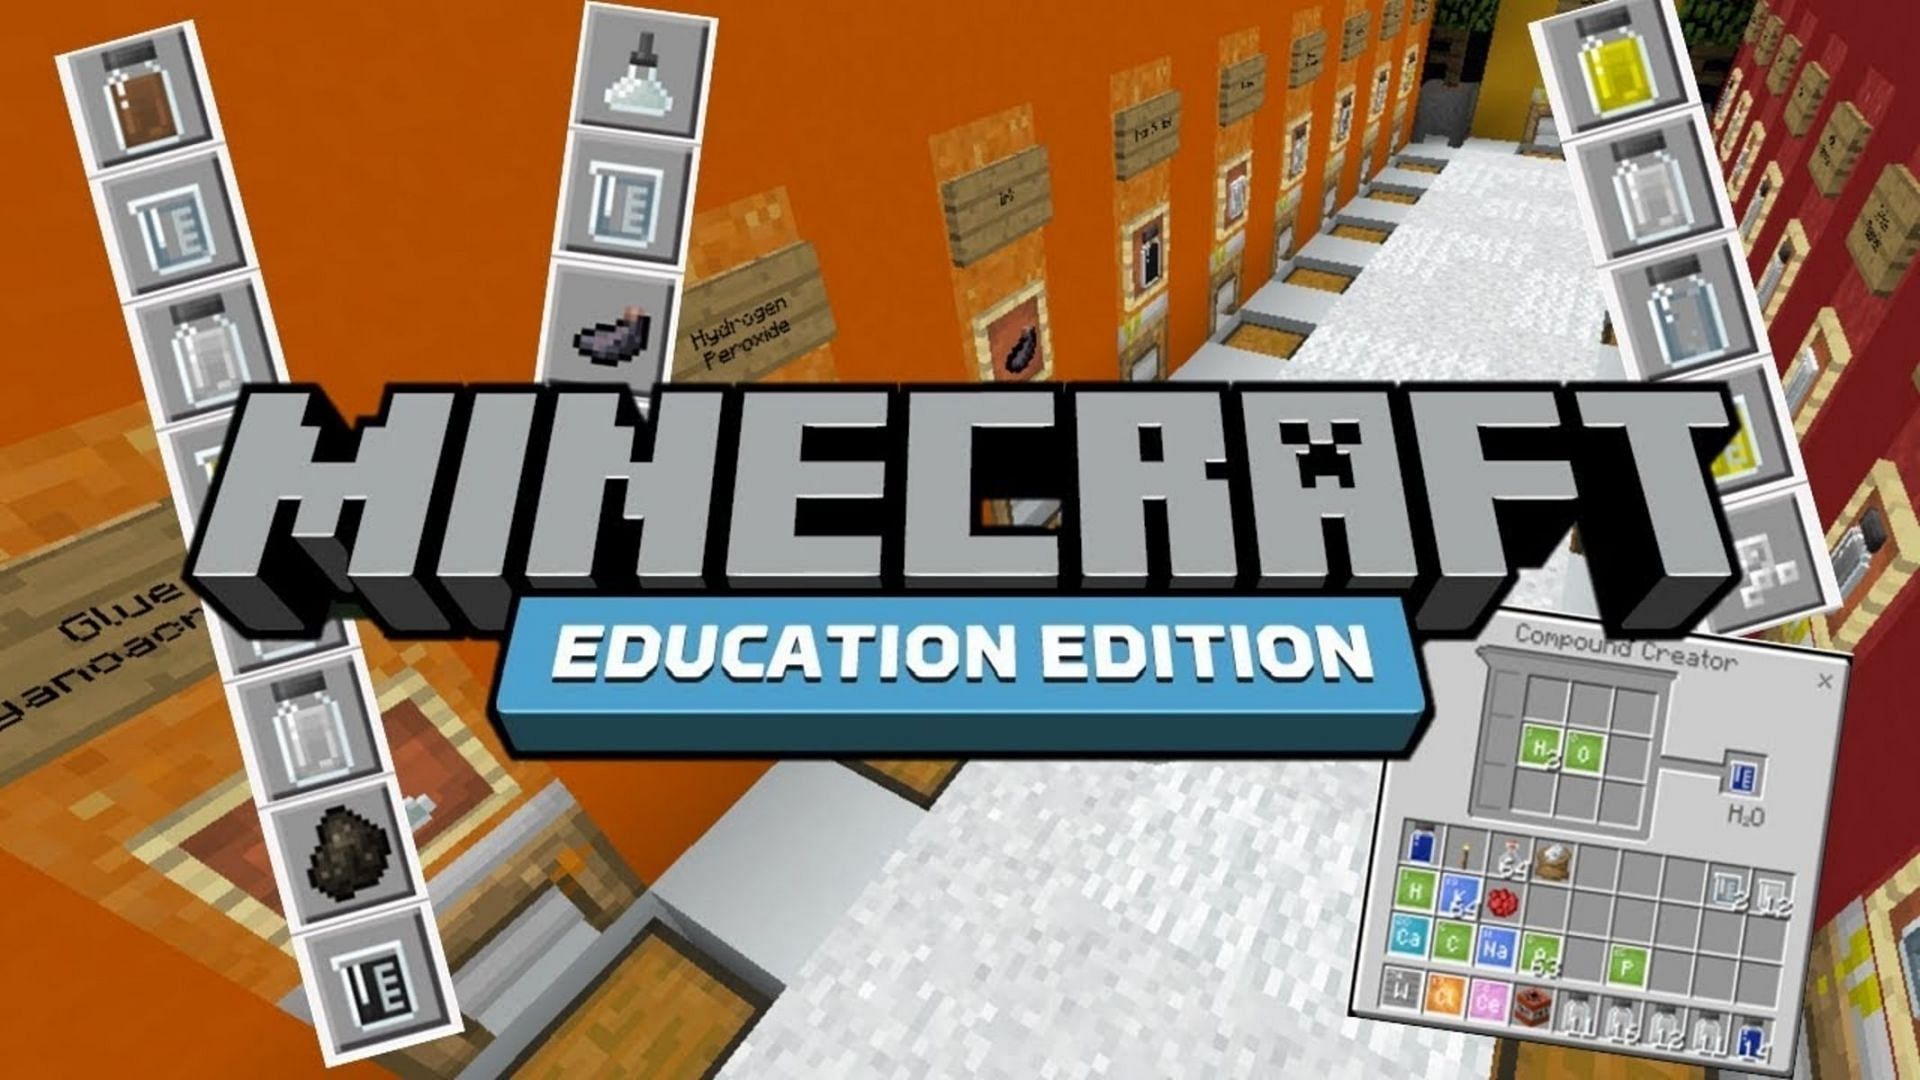 Chemistry is a huge part of Minecraft Education Edition (Image via YouTube/Goggled Gecko)